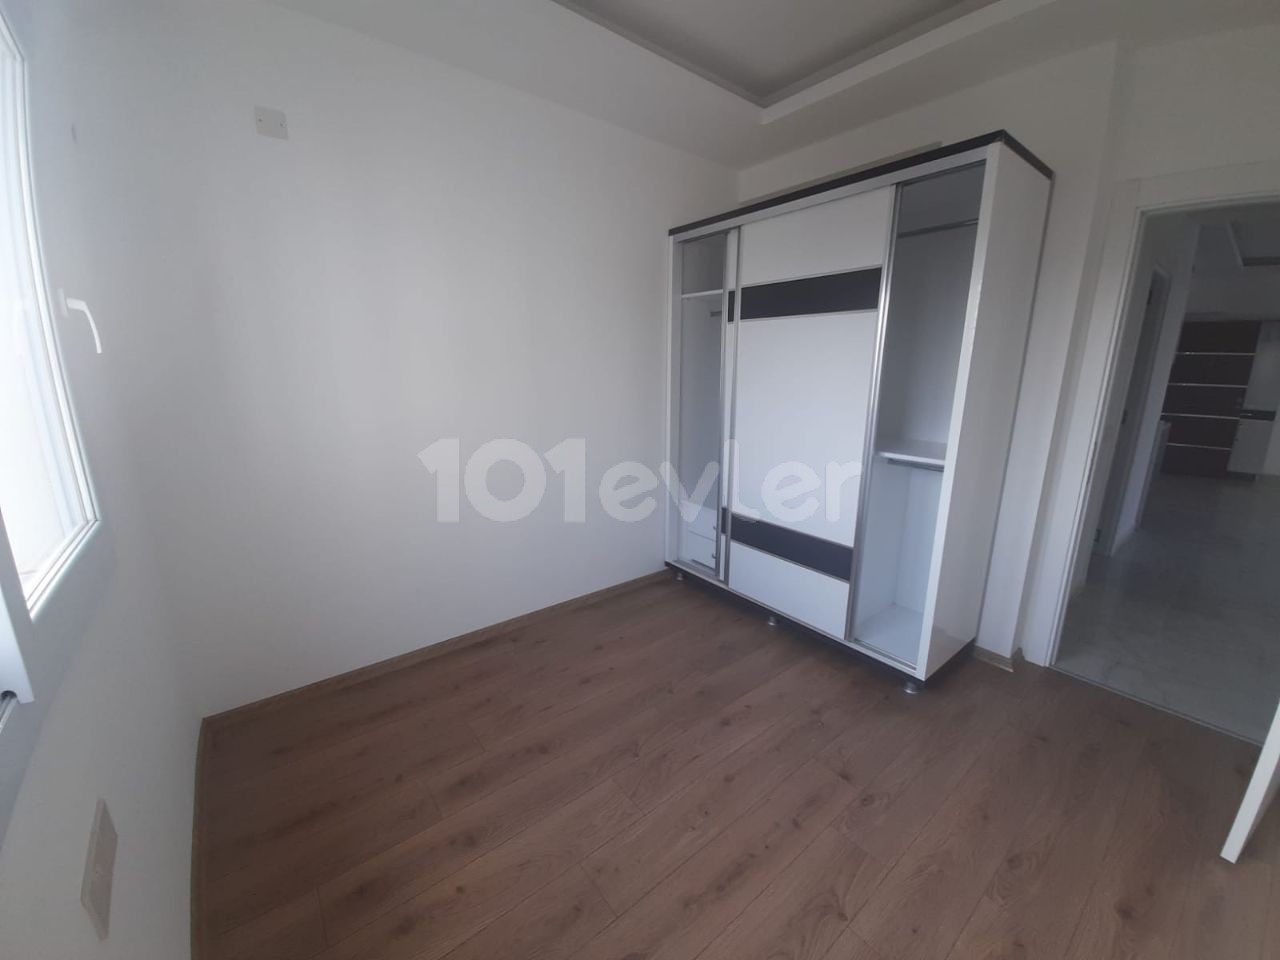 2+1 flats for sale in iskele long beach unfurnished flats 85 square meters 130.000 STG QUALITY WORKMANSHIP WALKING DISTANCE TO THE SEA. FLAT IS ON THE 1st FLOOR.